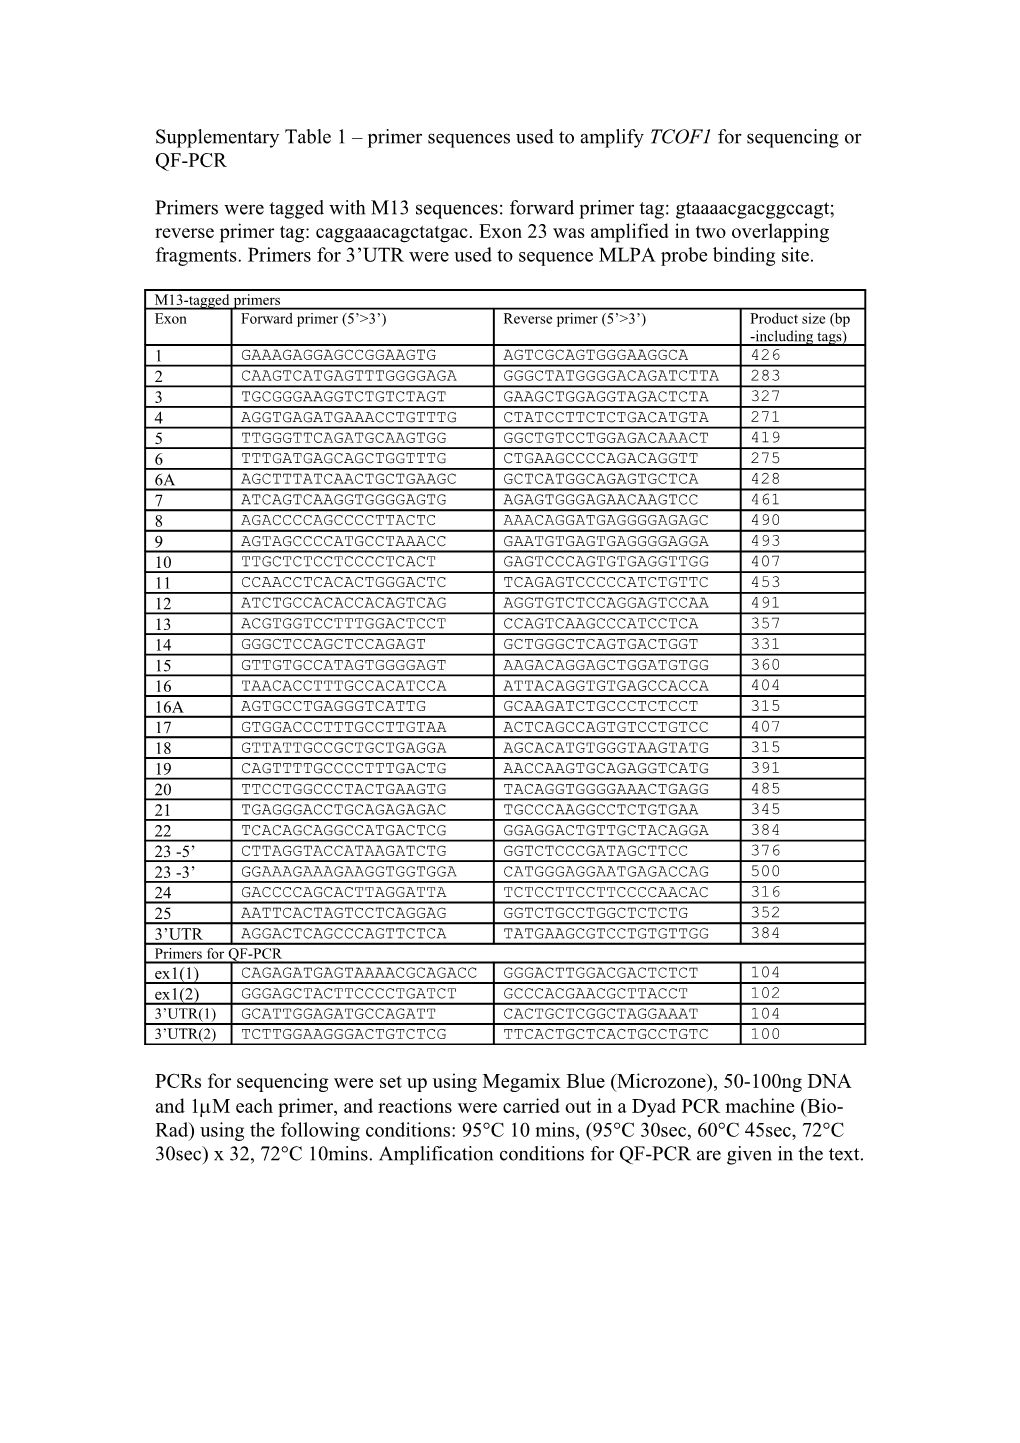 Supplementary Table 1 Primer Sequences Used to Amplify TCOF1 Exons